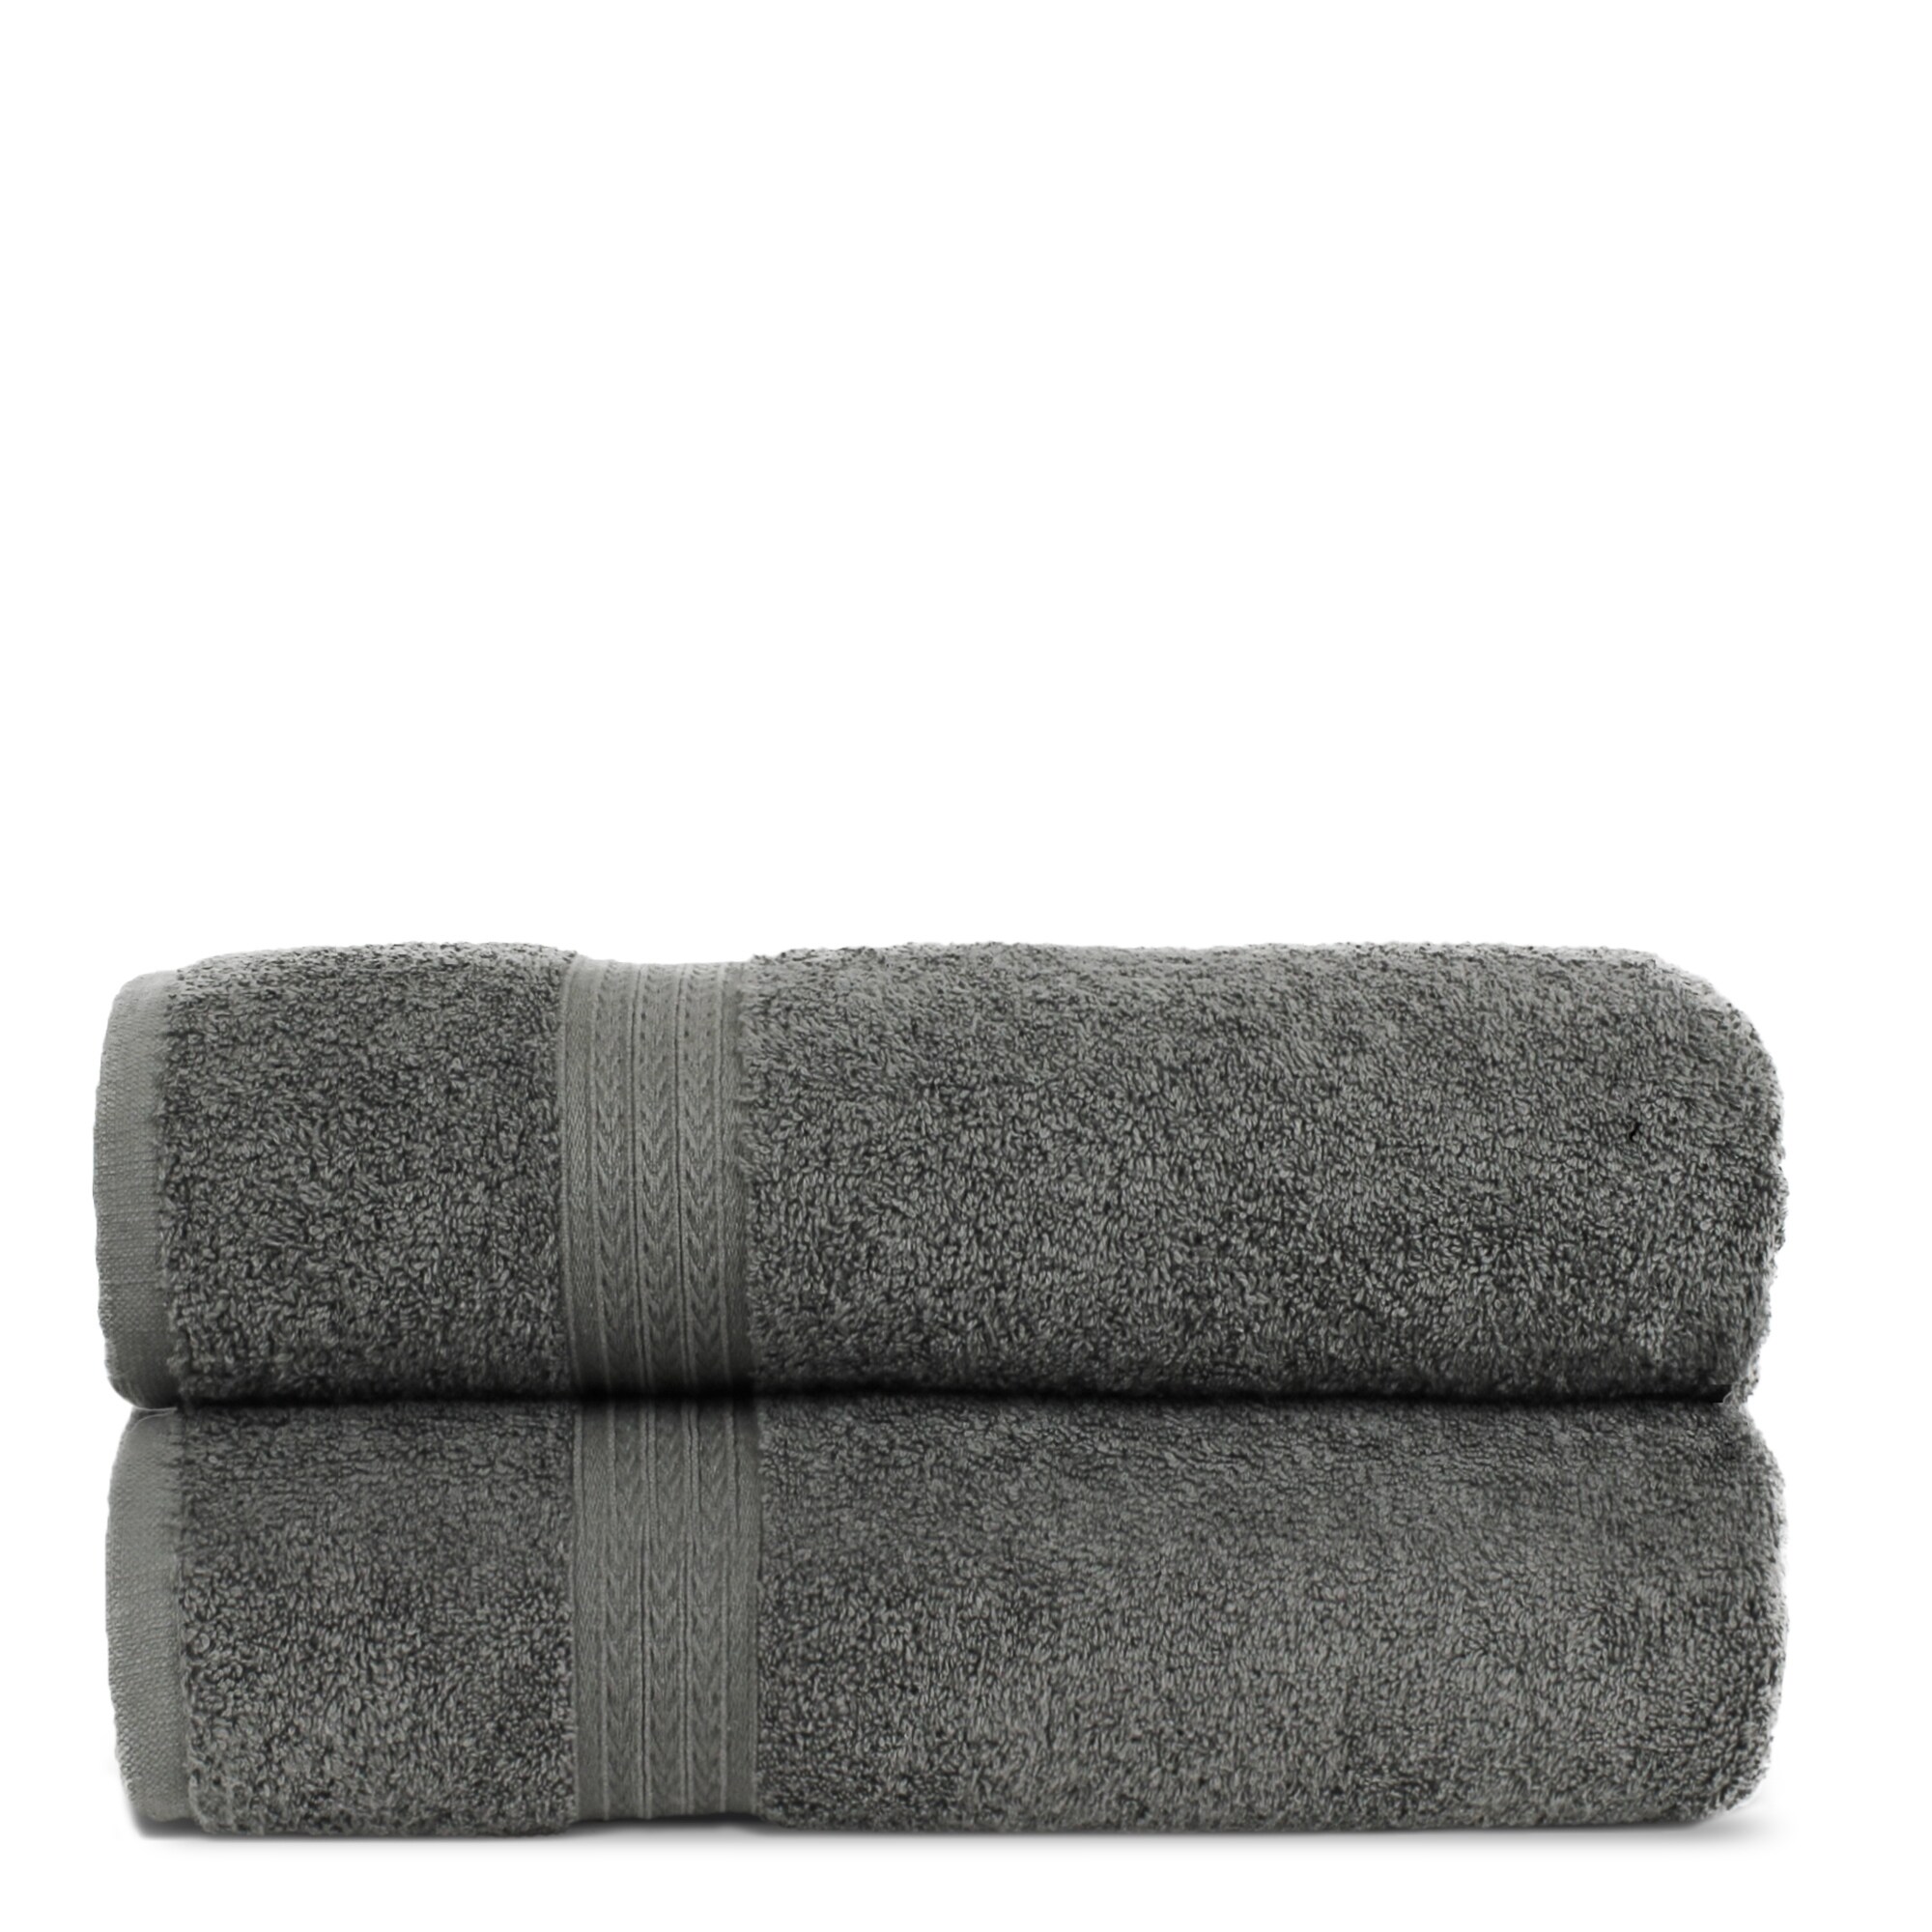 https://ak1.ostkcdn.com/images/products/19671426/Luxury-Hotel-Collection-Cotton-Eco-Gray-Bath-Towels-Dobby-Border-Set-of-4-cfd7a4f3-fc67-4d92-913b-a62956fff7b8.jpg